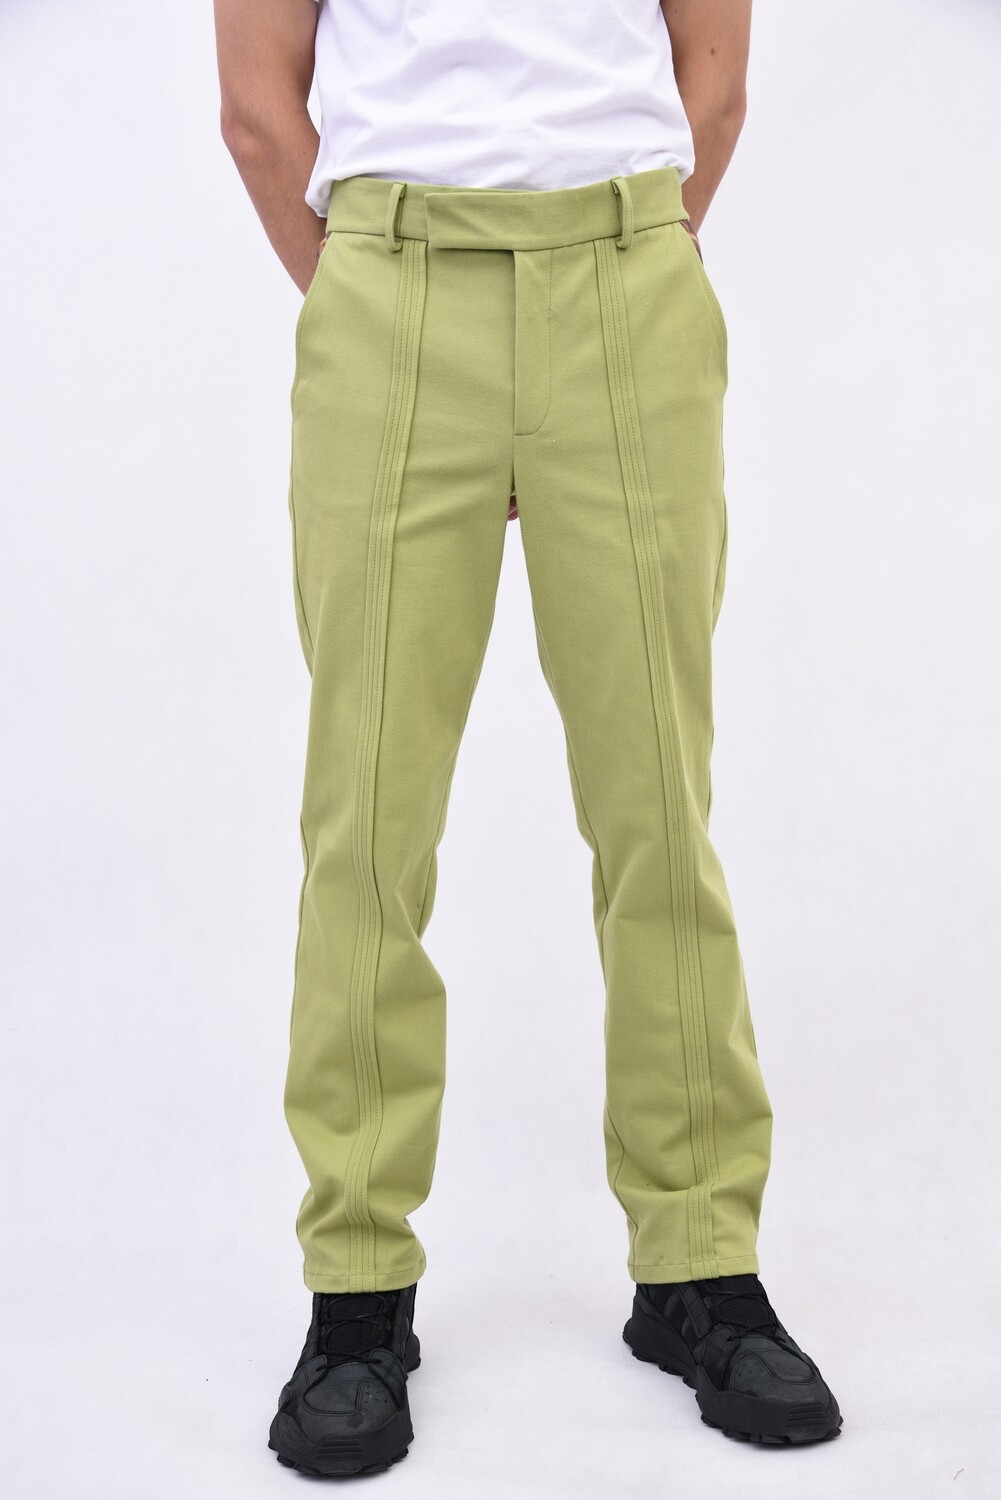 Green trousers for men